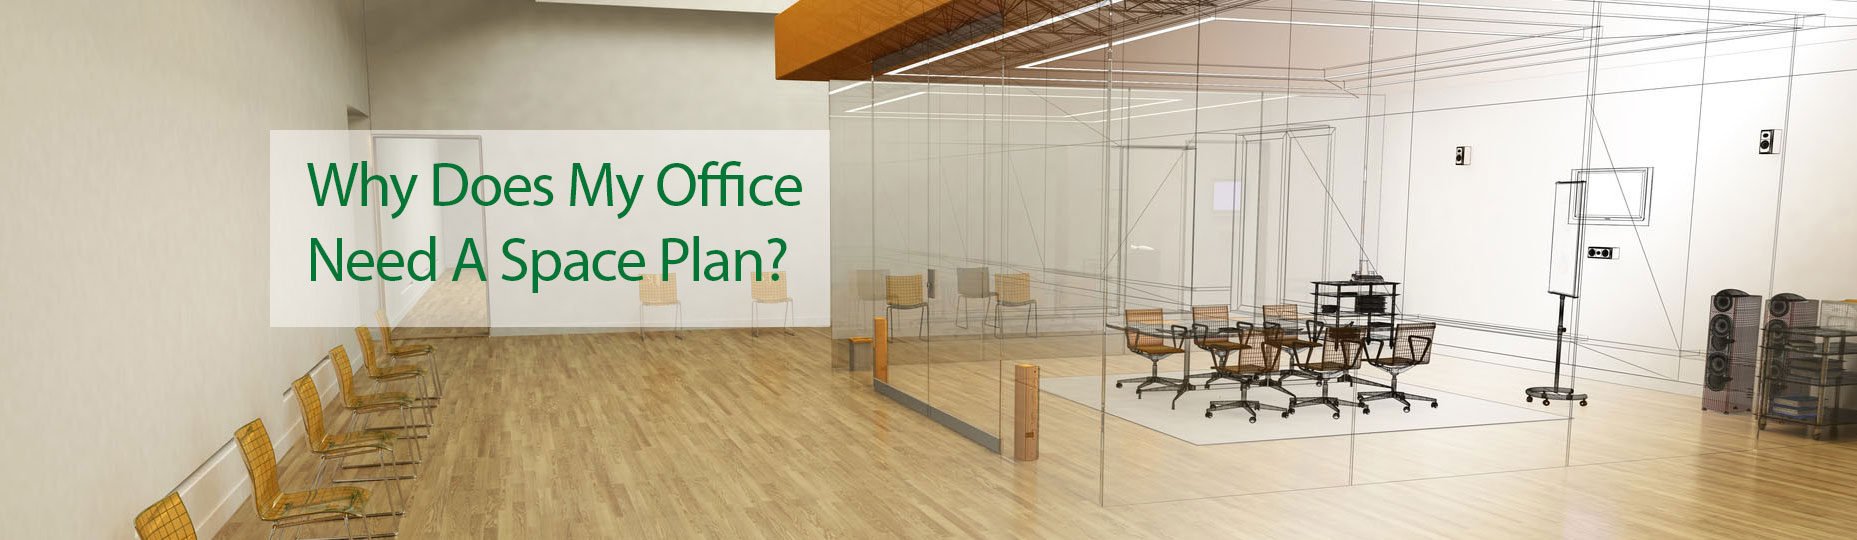 Free Office Space Plans Image